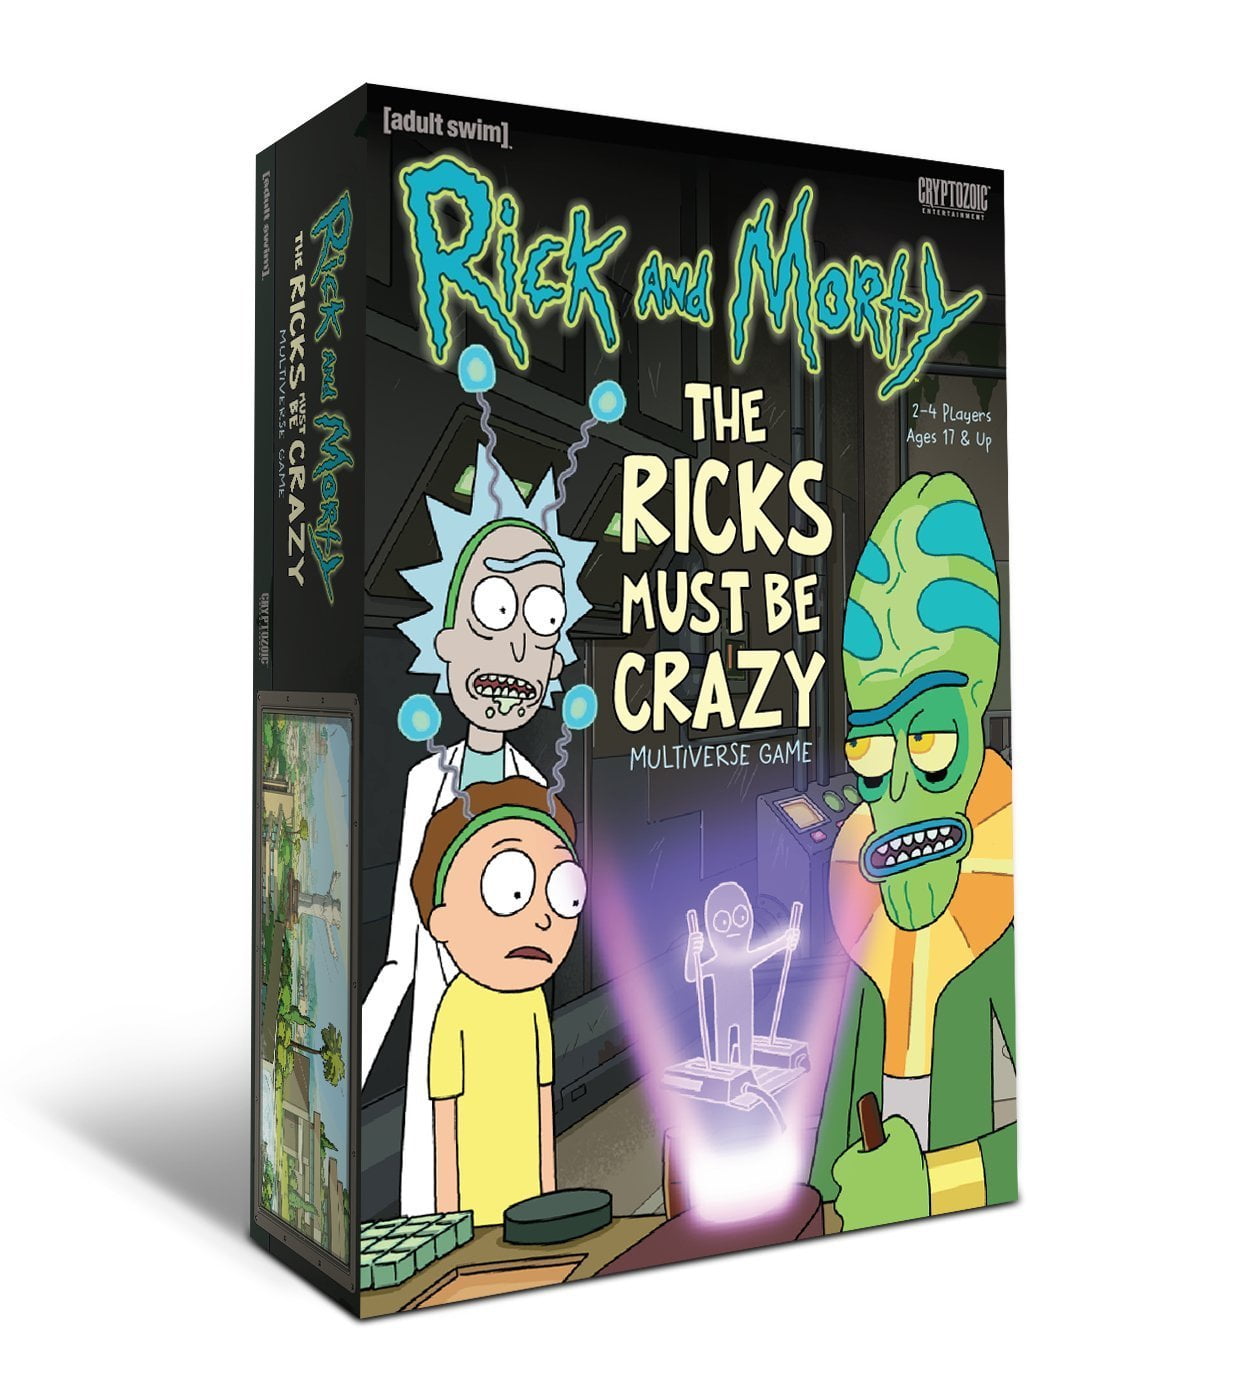 Cze02402 Cryptozoic Entertainment Rick and Morty Anatomy Park Game 02512cze for sale online 